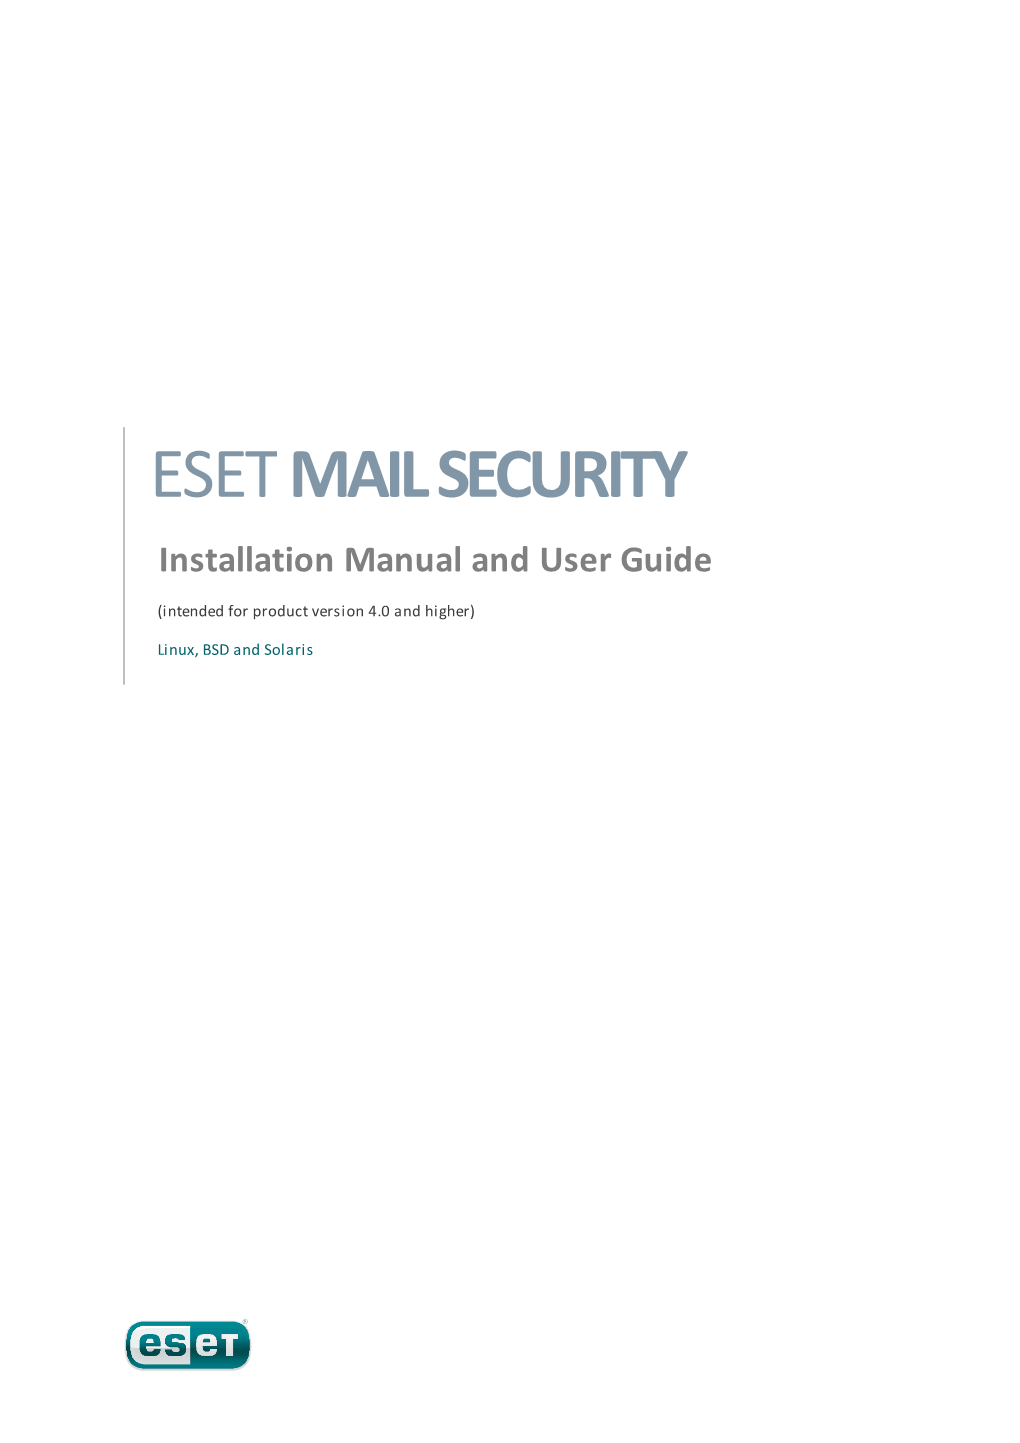 ESET MAIL SECURITY Installation Manual and User Guide